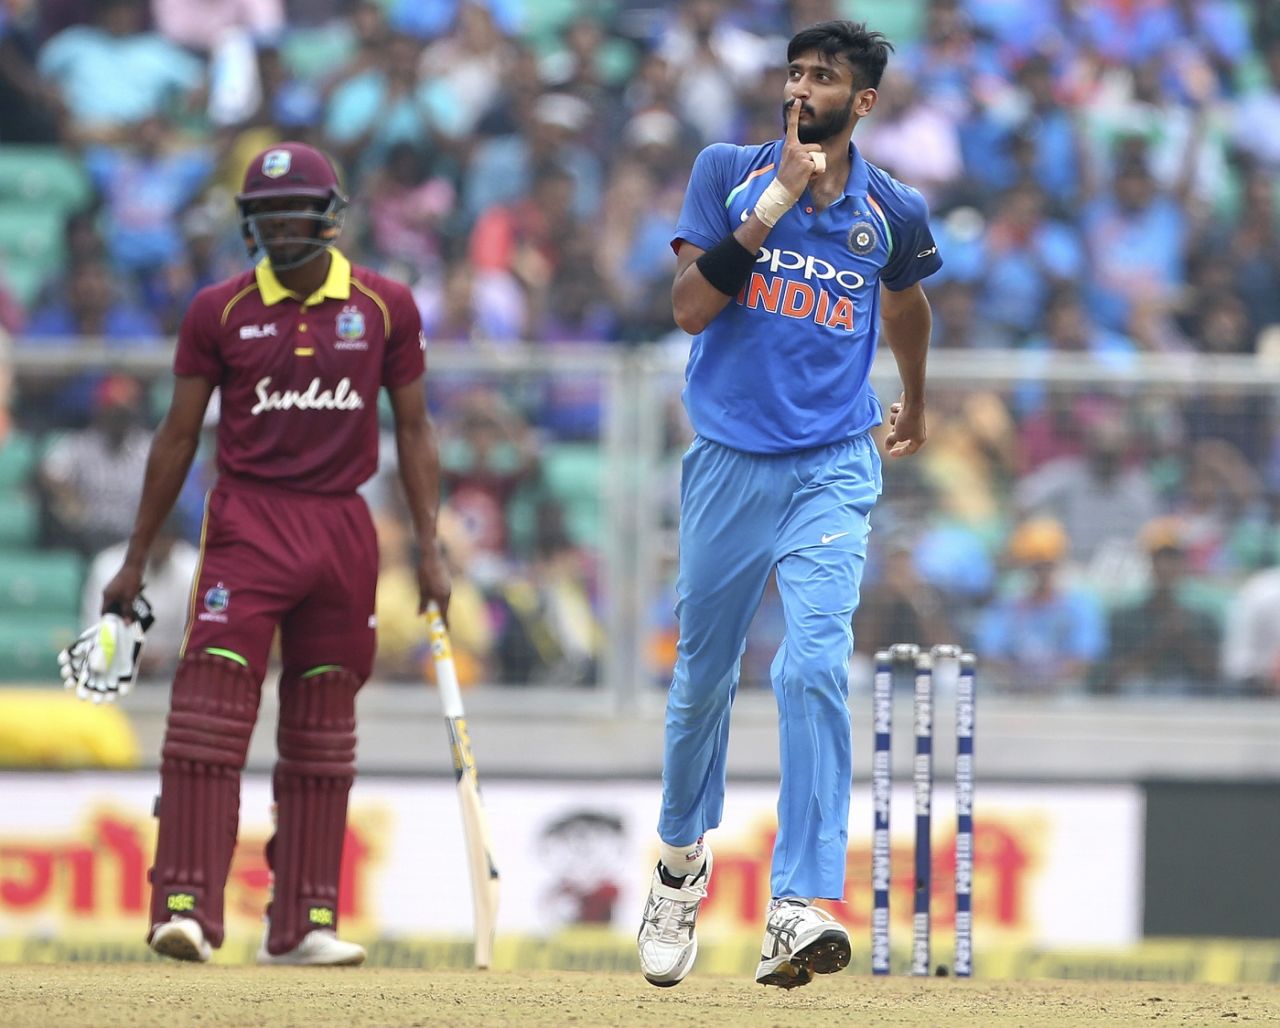 Khaleel Ahmed puts a finger on his lips in celebrating a wicket, India v West Indies, 5th ODI, Thiruvananthapuram, November 1, 2018